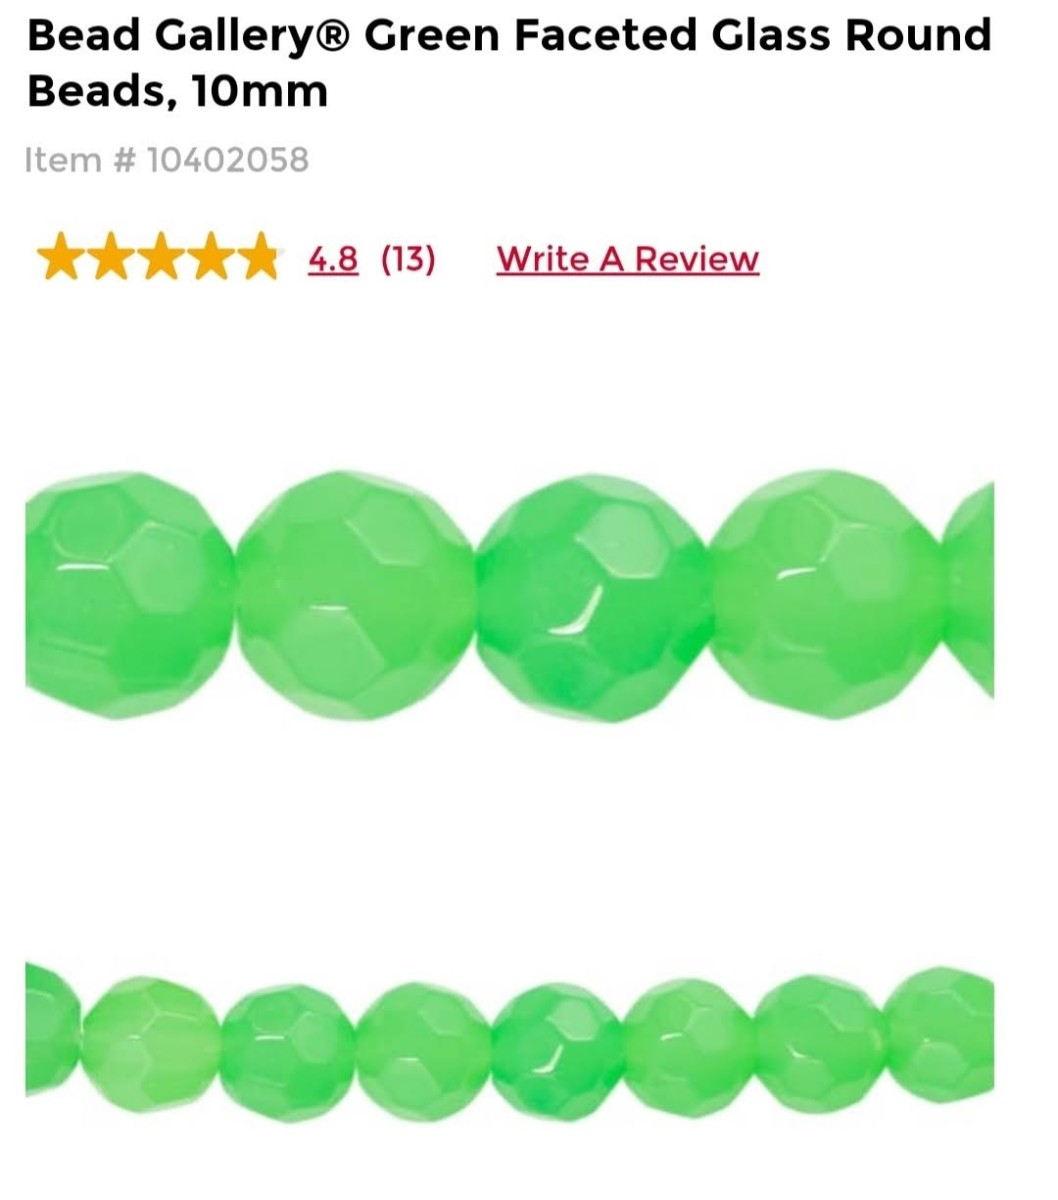 Bead Gallery Green Faceted Glass Round Beads 10mm